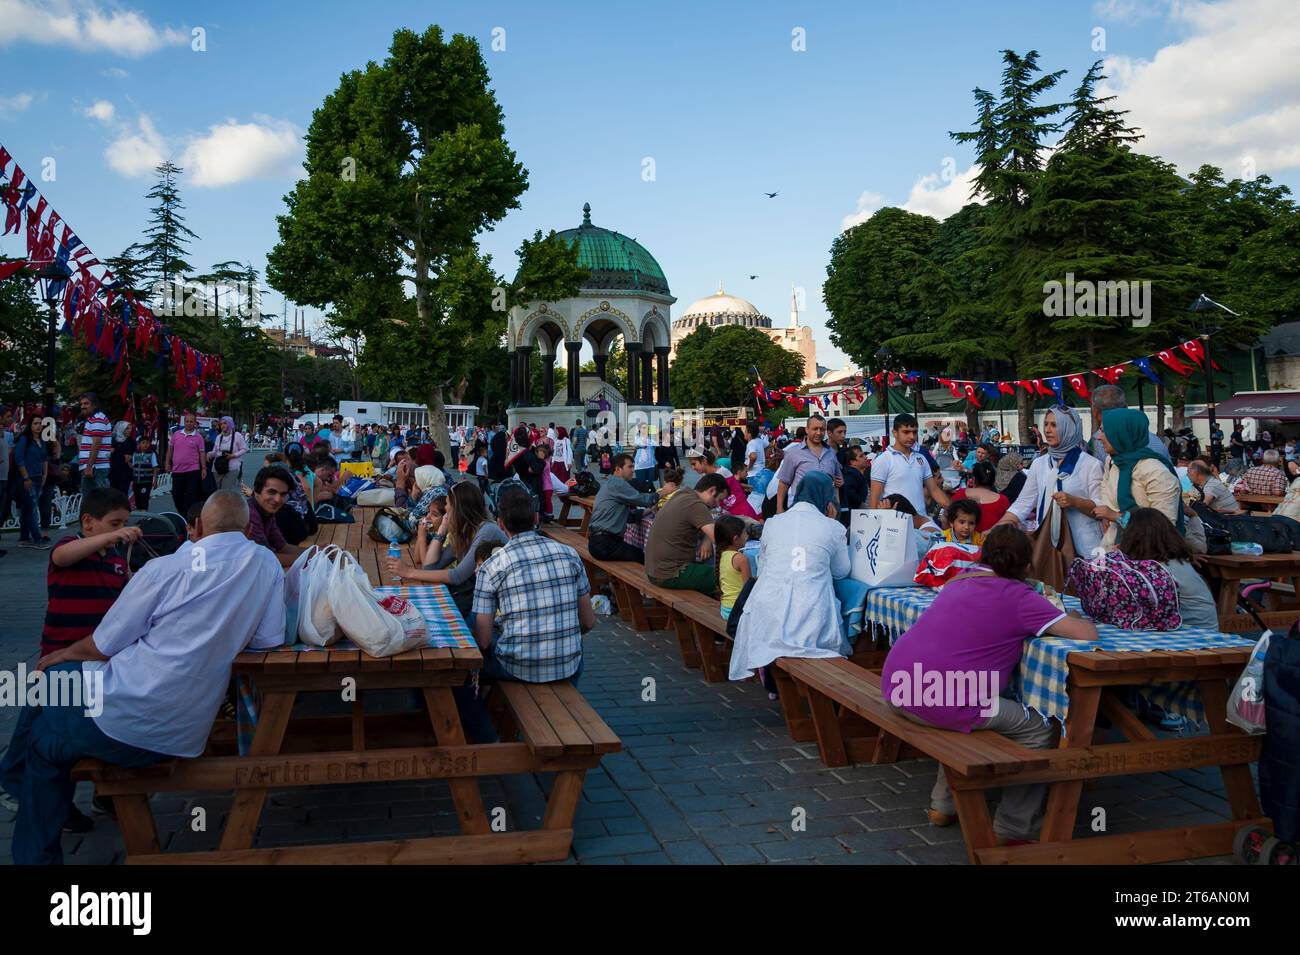 Turkey, Istanbul, Jun 29th, 2014. Muslim waiting for iftar to break the fast in a park Stock Photo